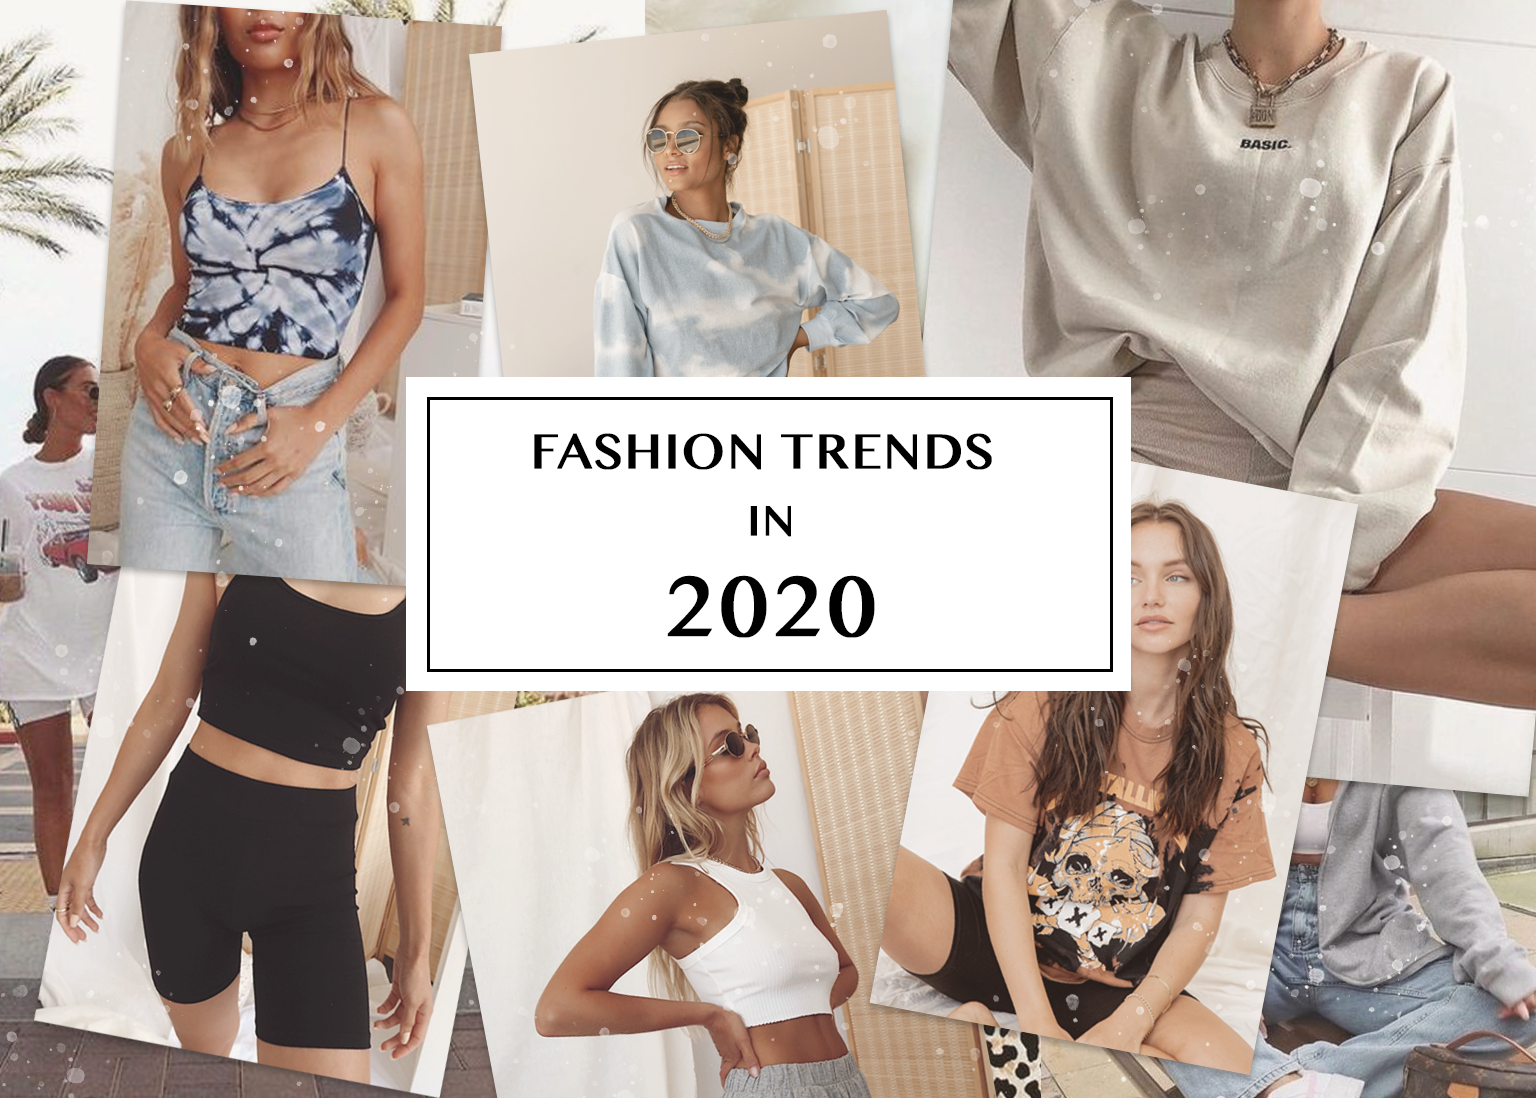 Fashion Trends in 2020